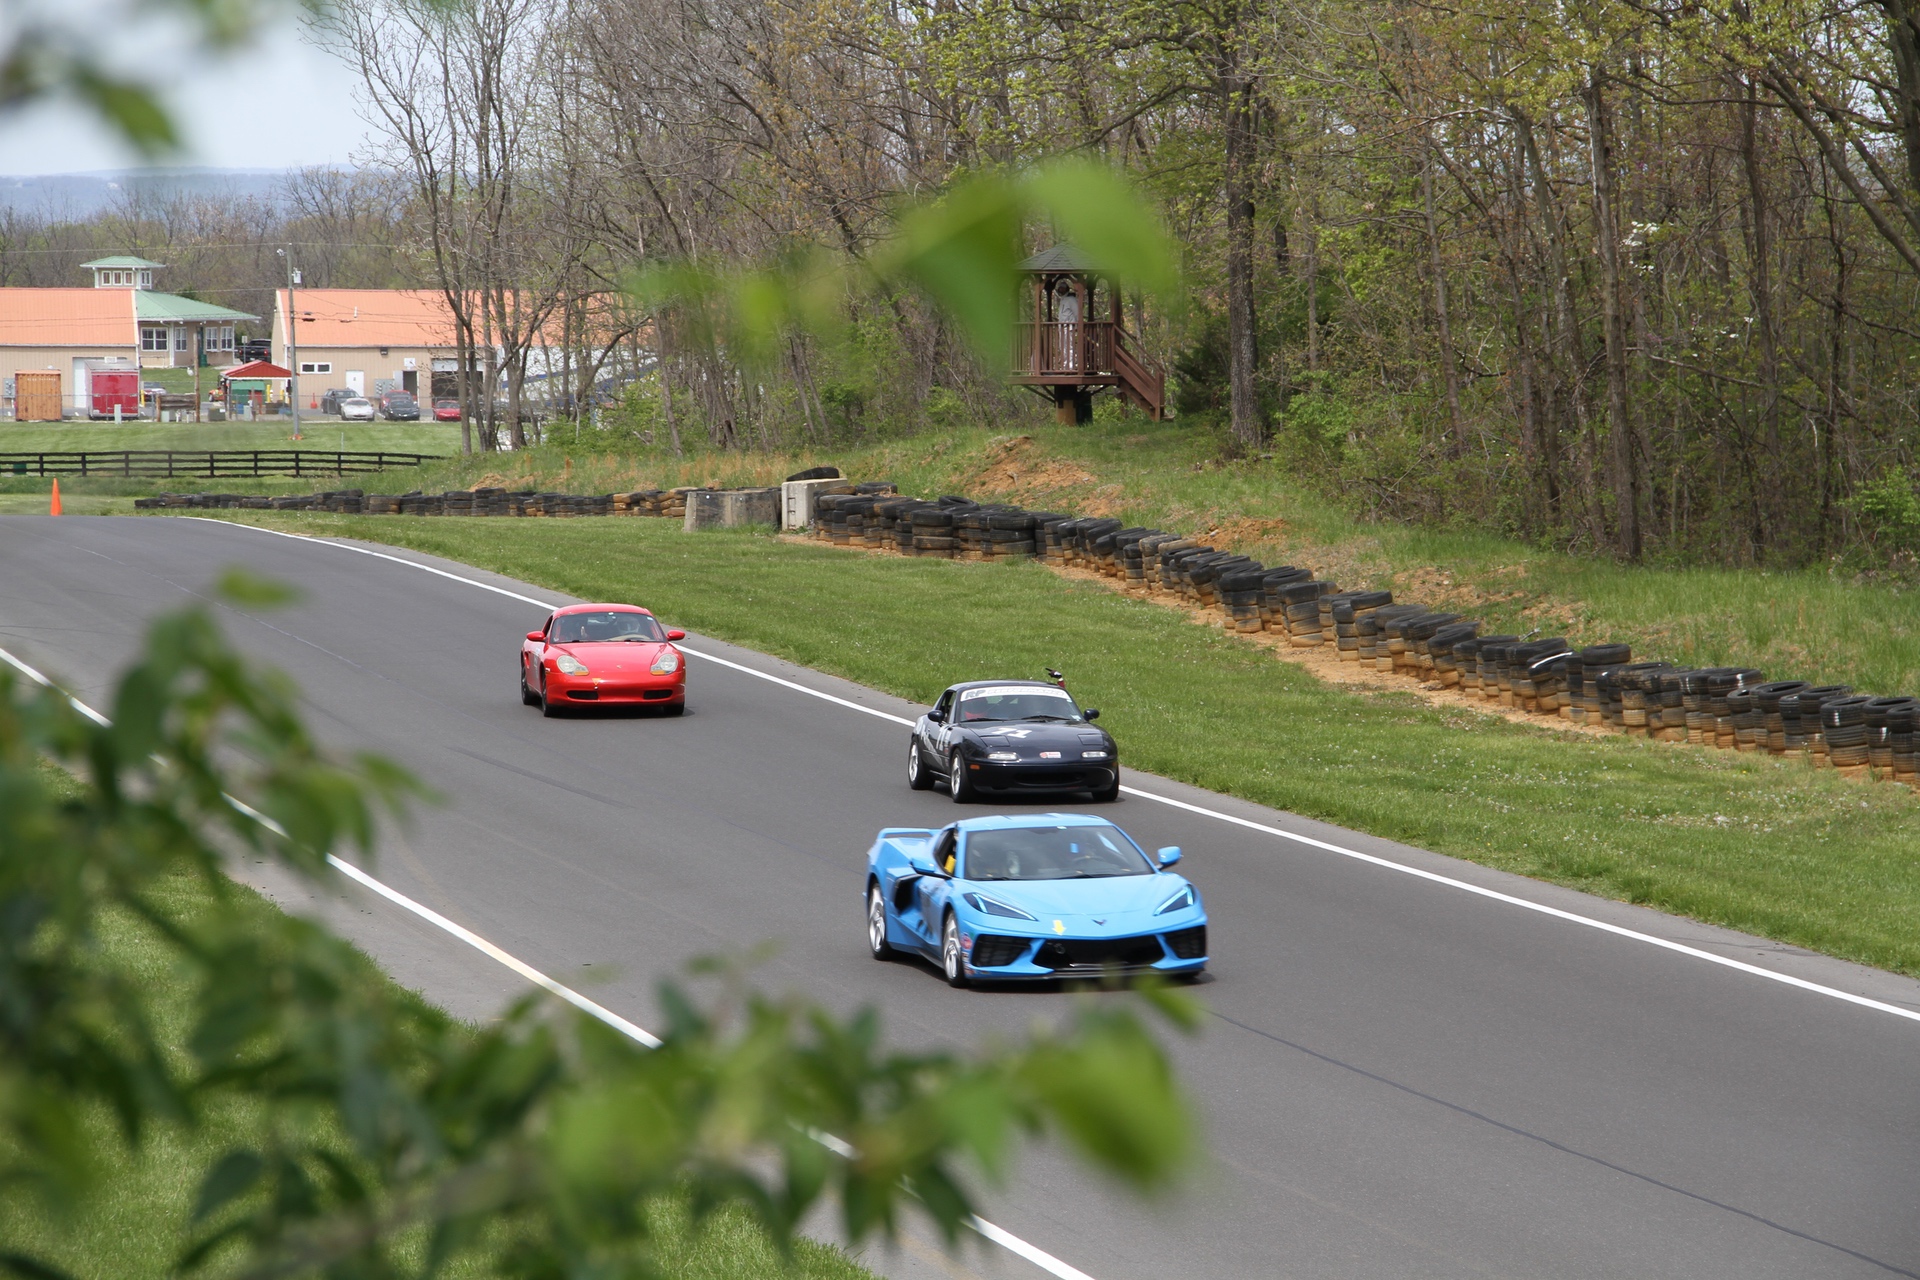 Ross Vincenti's 1998 Porsche Boxster Spec Race Car behind others on road